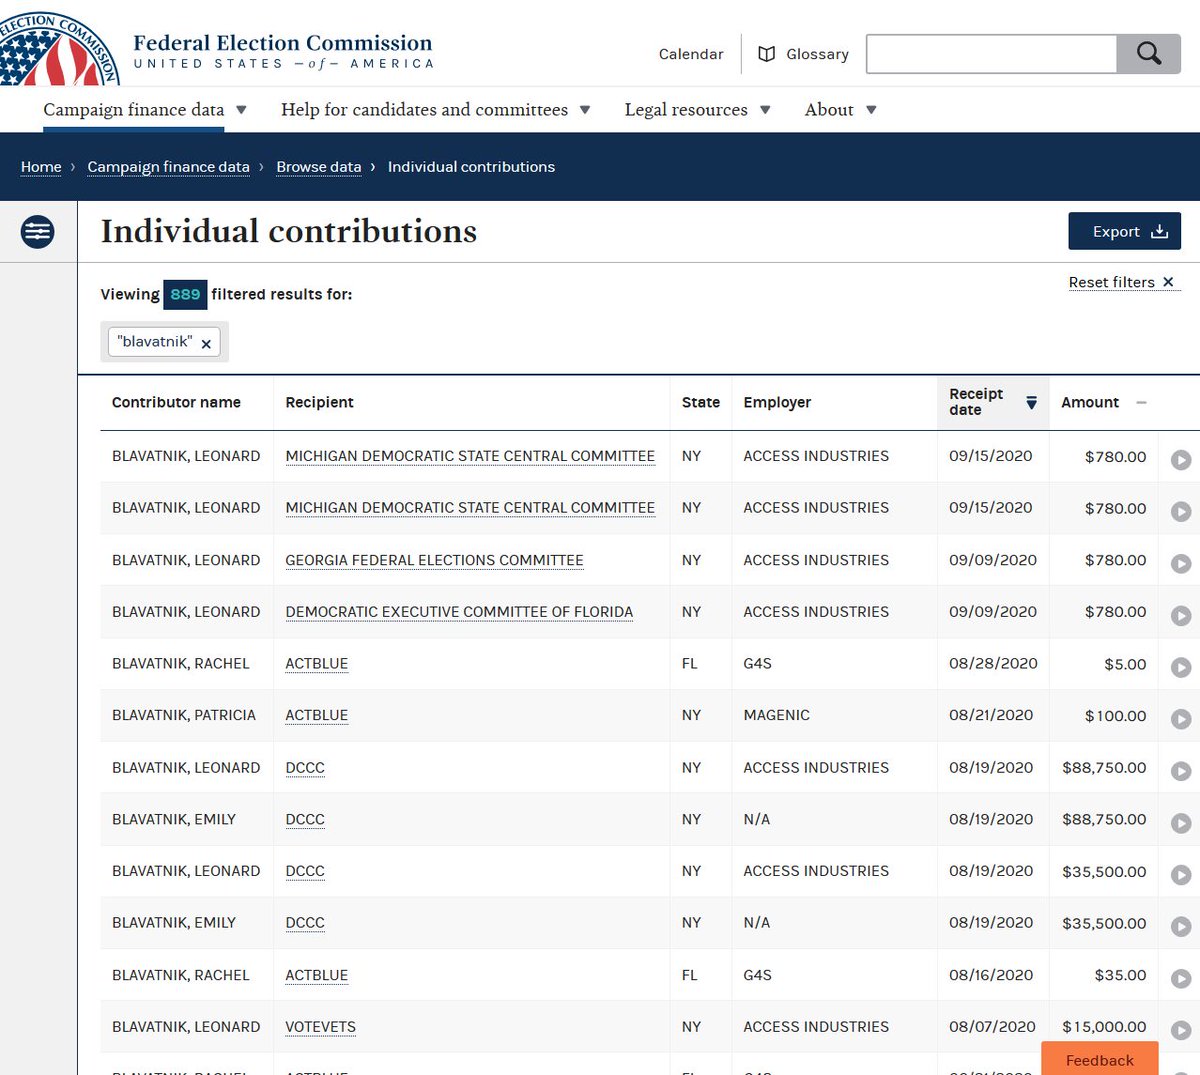 20/ less than 24hrs before  #ElectionDay and donations this year from billionaire len blavatnik are in stark contrast from previous yearssource:  https://www.fec.gov/data/receipts/individual-contributions/?contributor_name=blavatnik